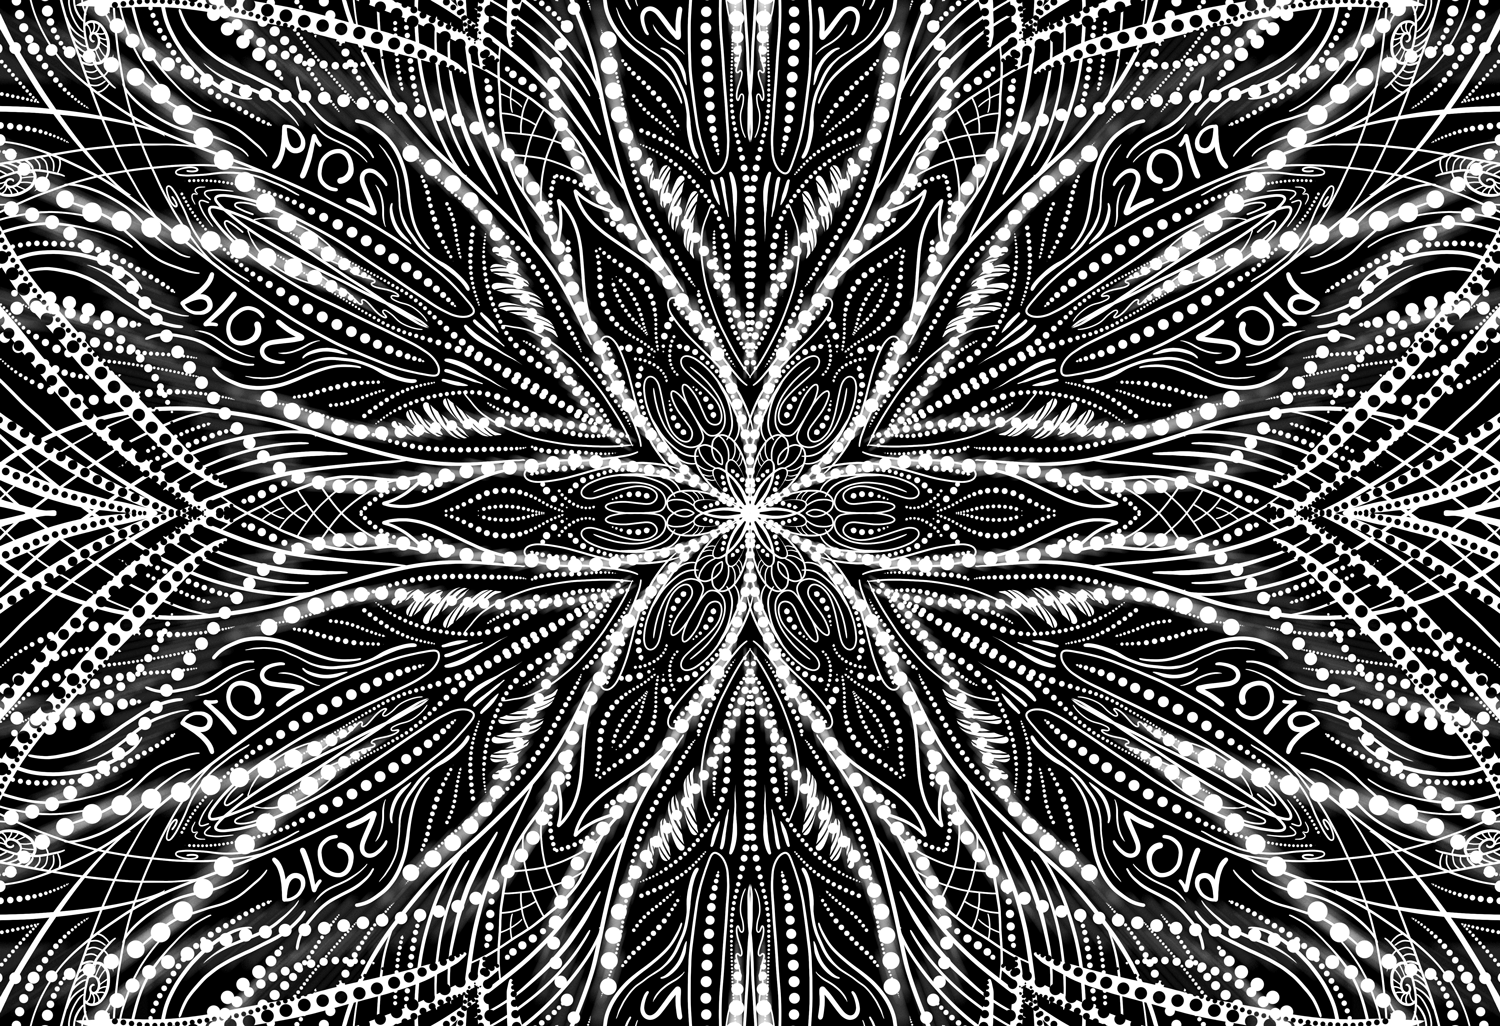 The black and white mandala pattern created in Photoshop CC 2019